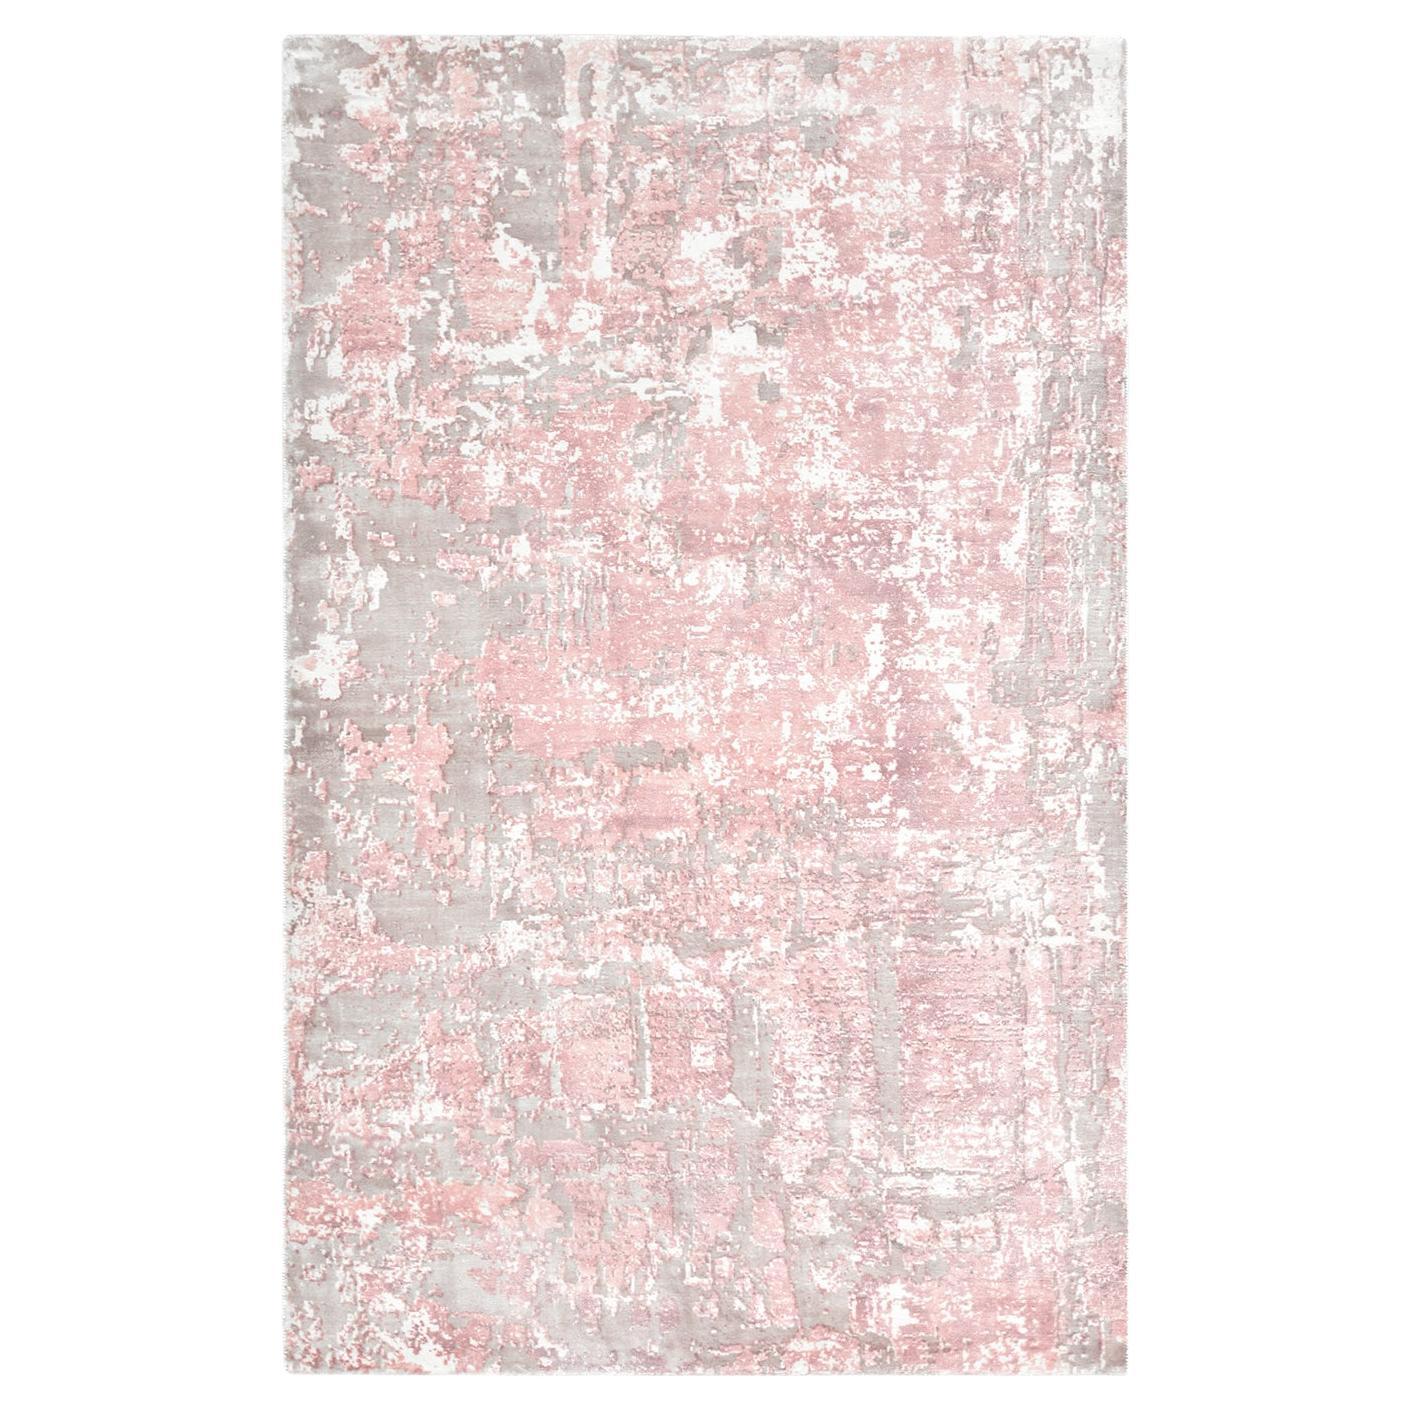 Solo Rugs Abstract Hand Loomed Pink 5 x 8 Tapis de sol en vente